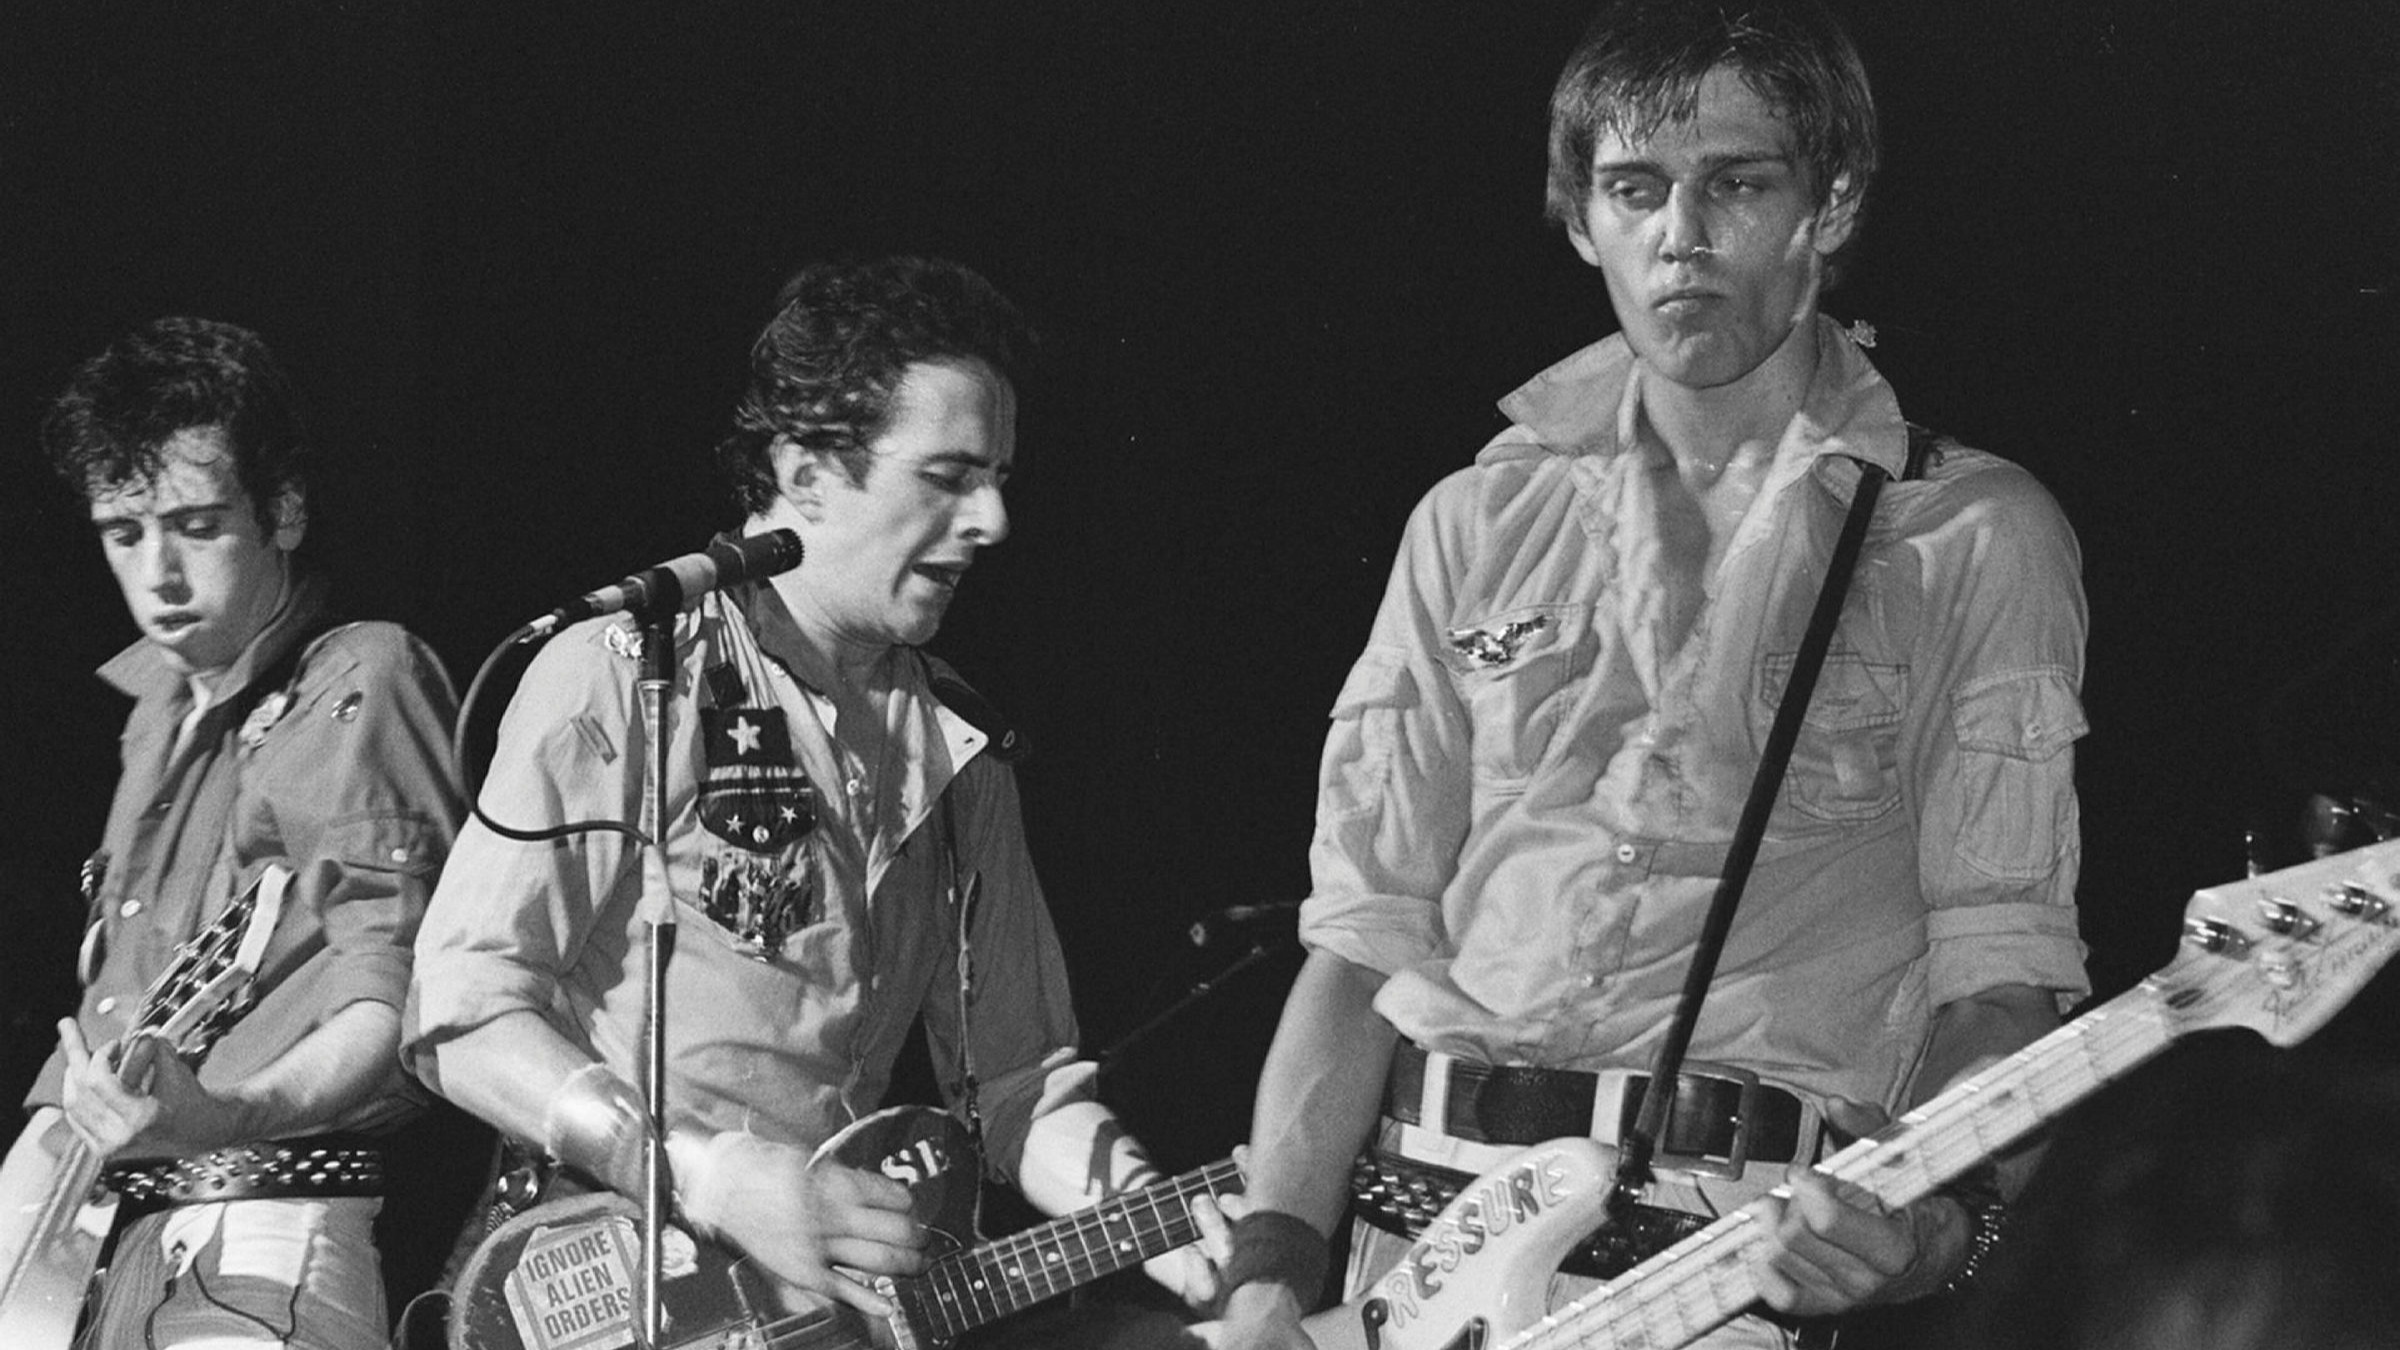 The Guns of Brixton — The Clash's track was inspired by Jimmy